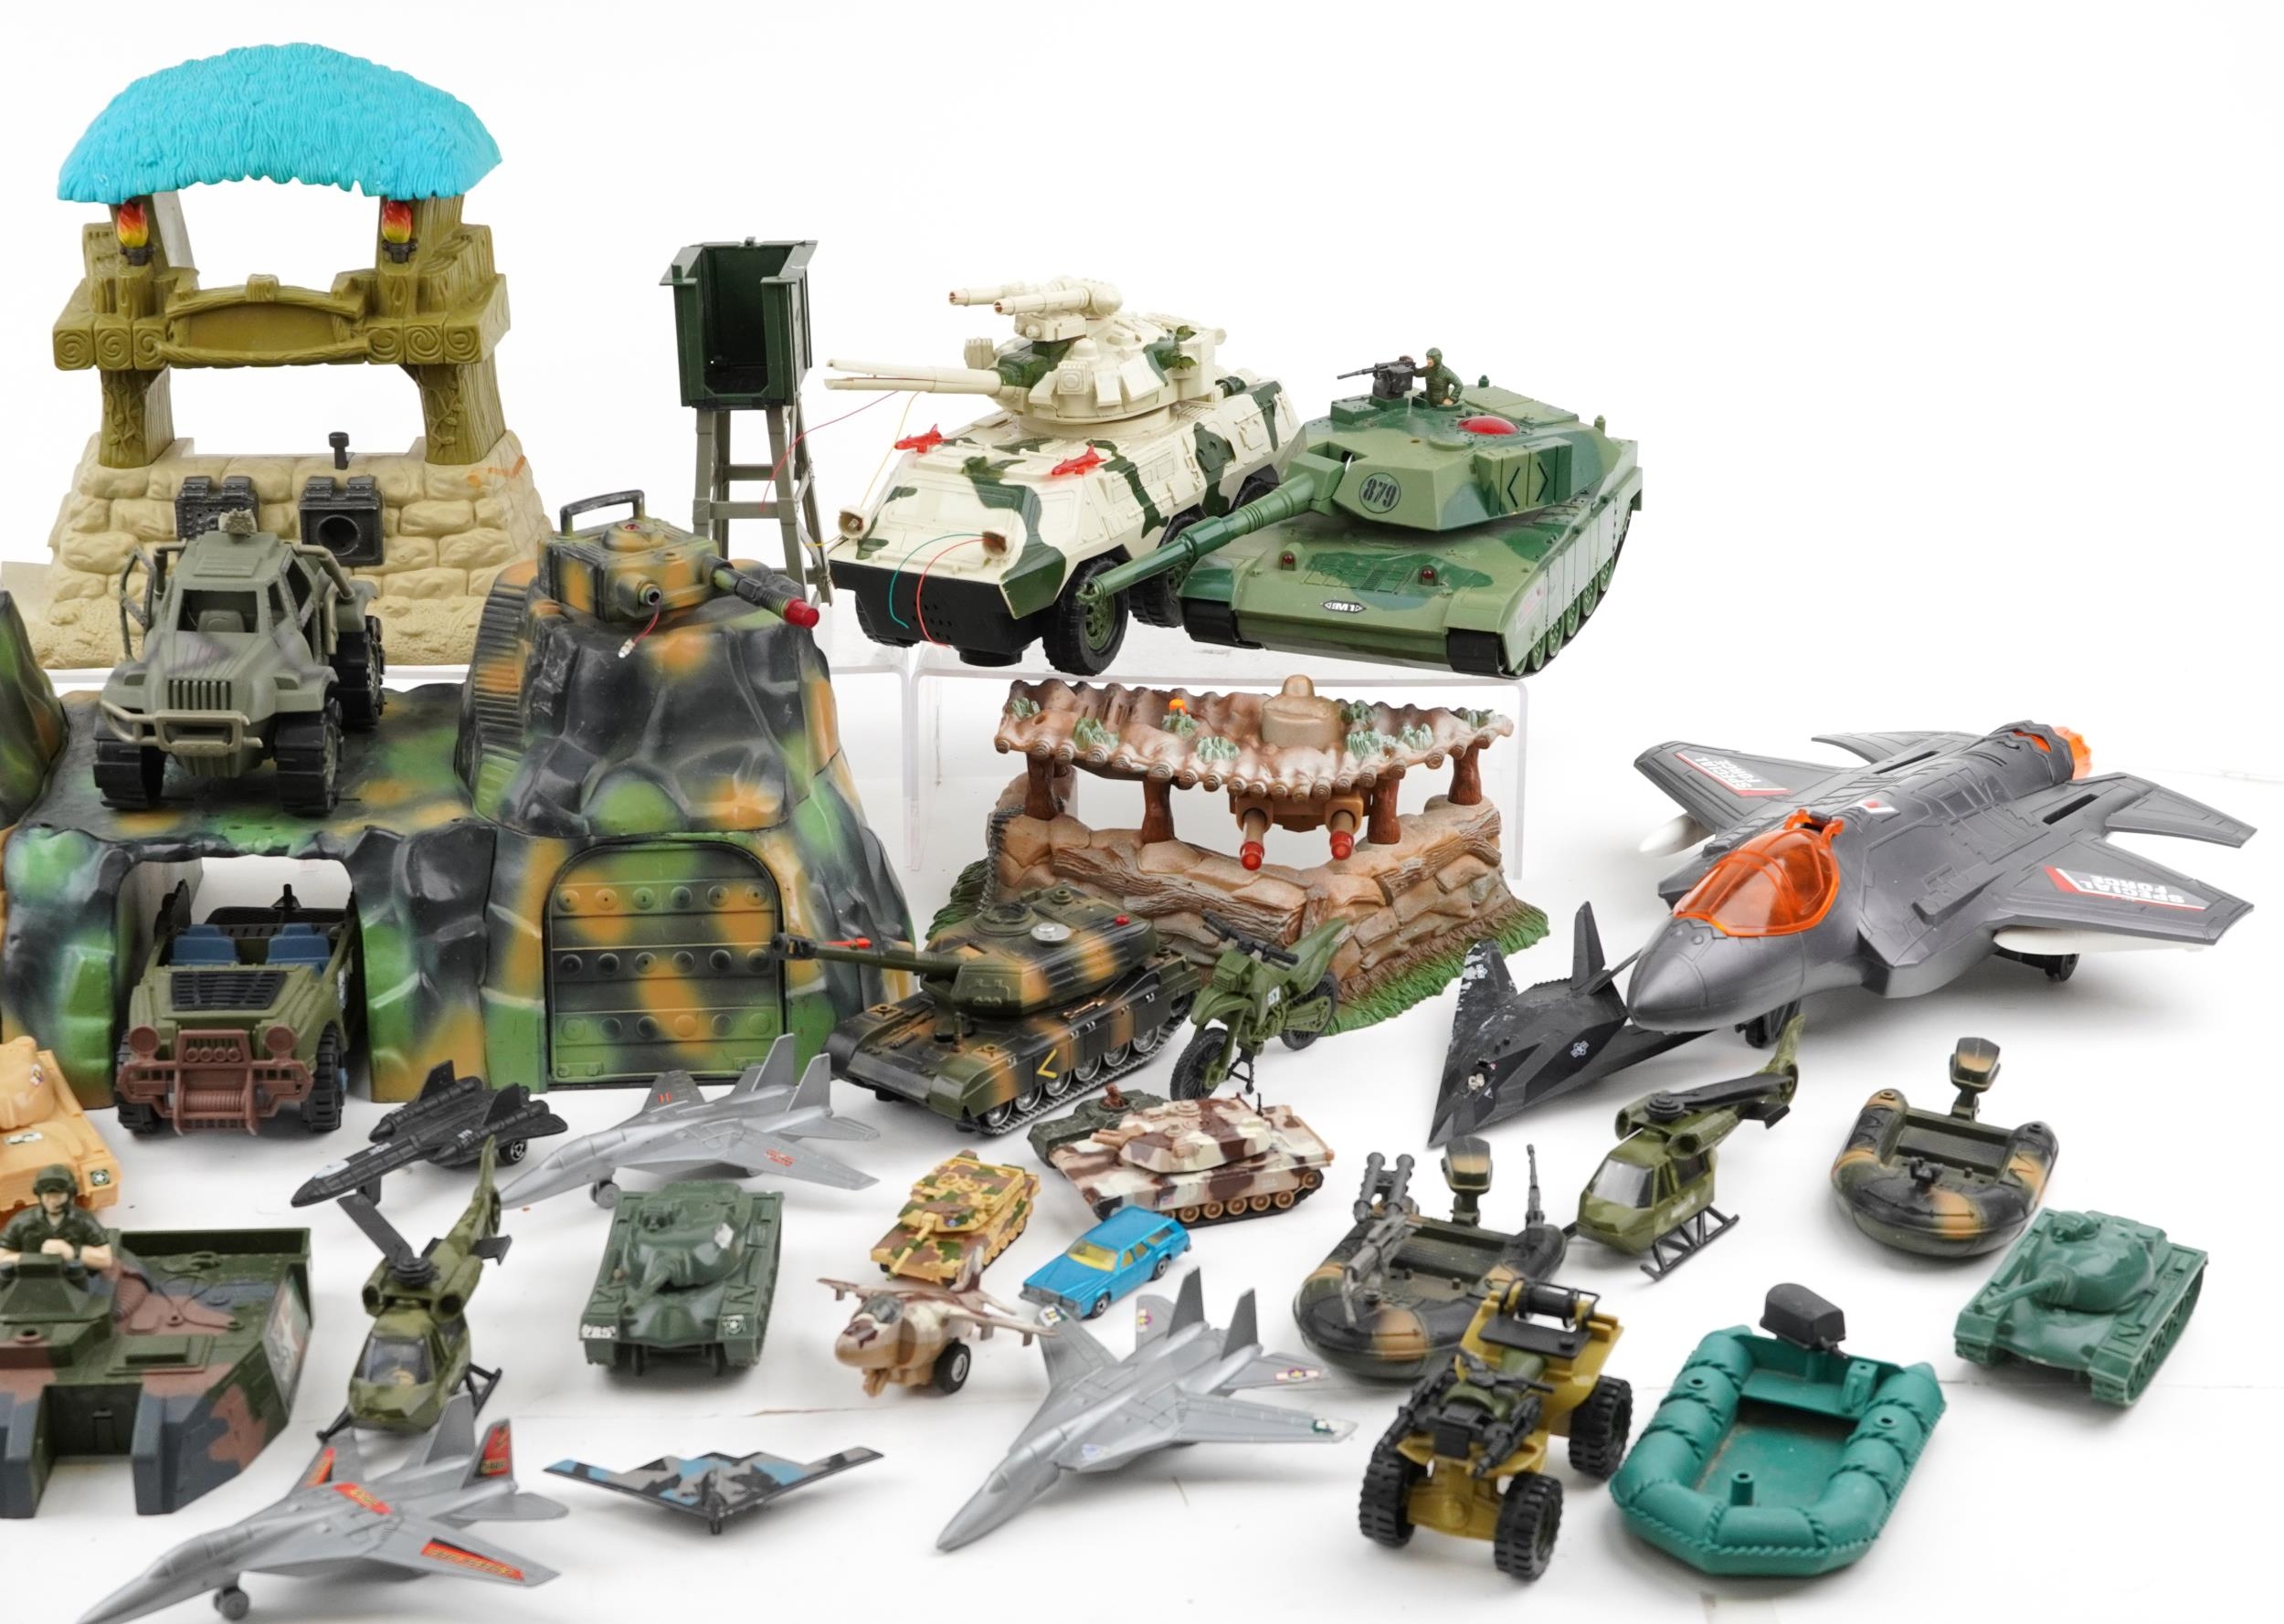 Collection of vintage and later army related toys including fighter jets and tanks - Image 3 of 3